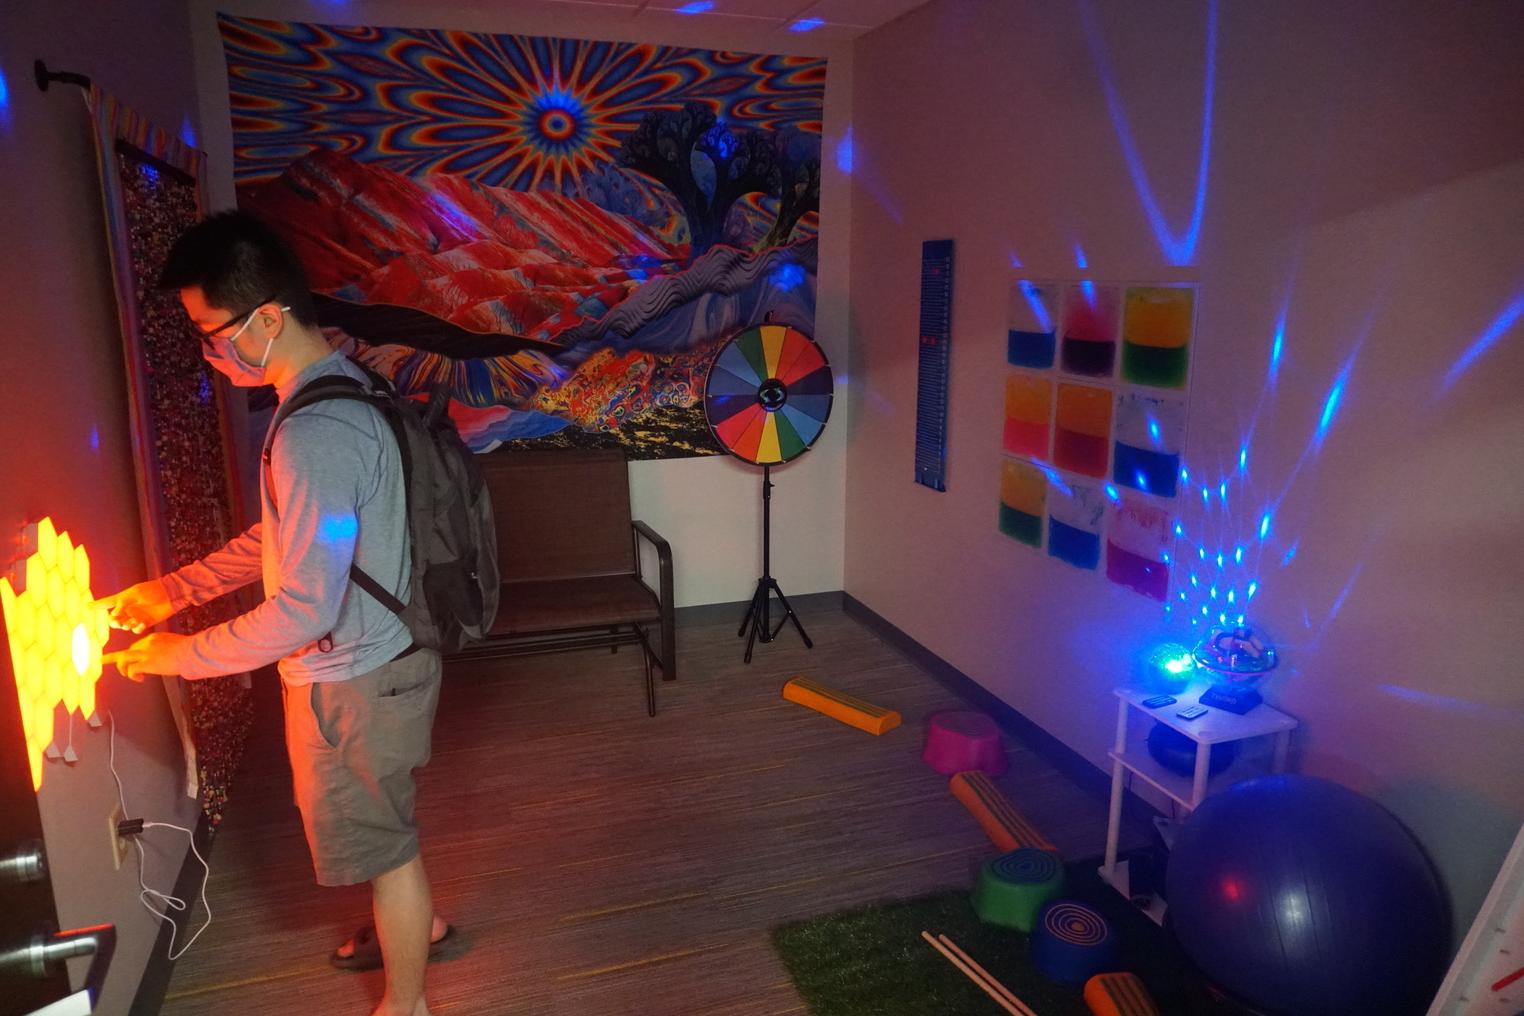 A student in a room with many flashing lights